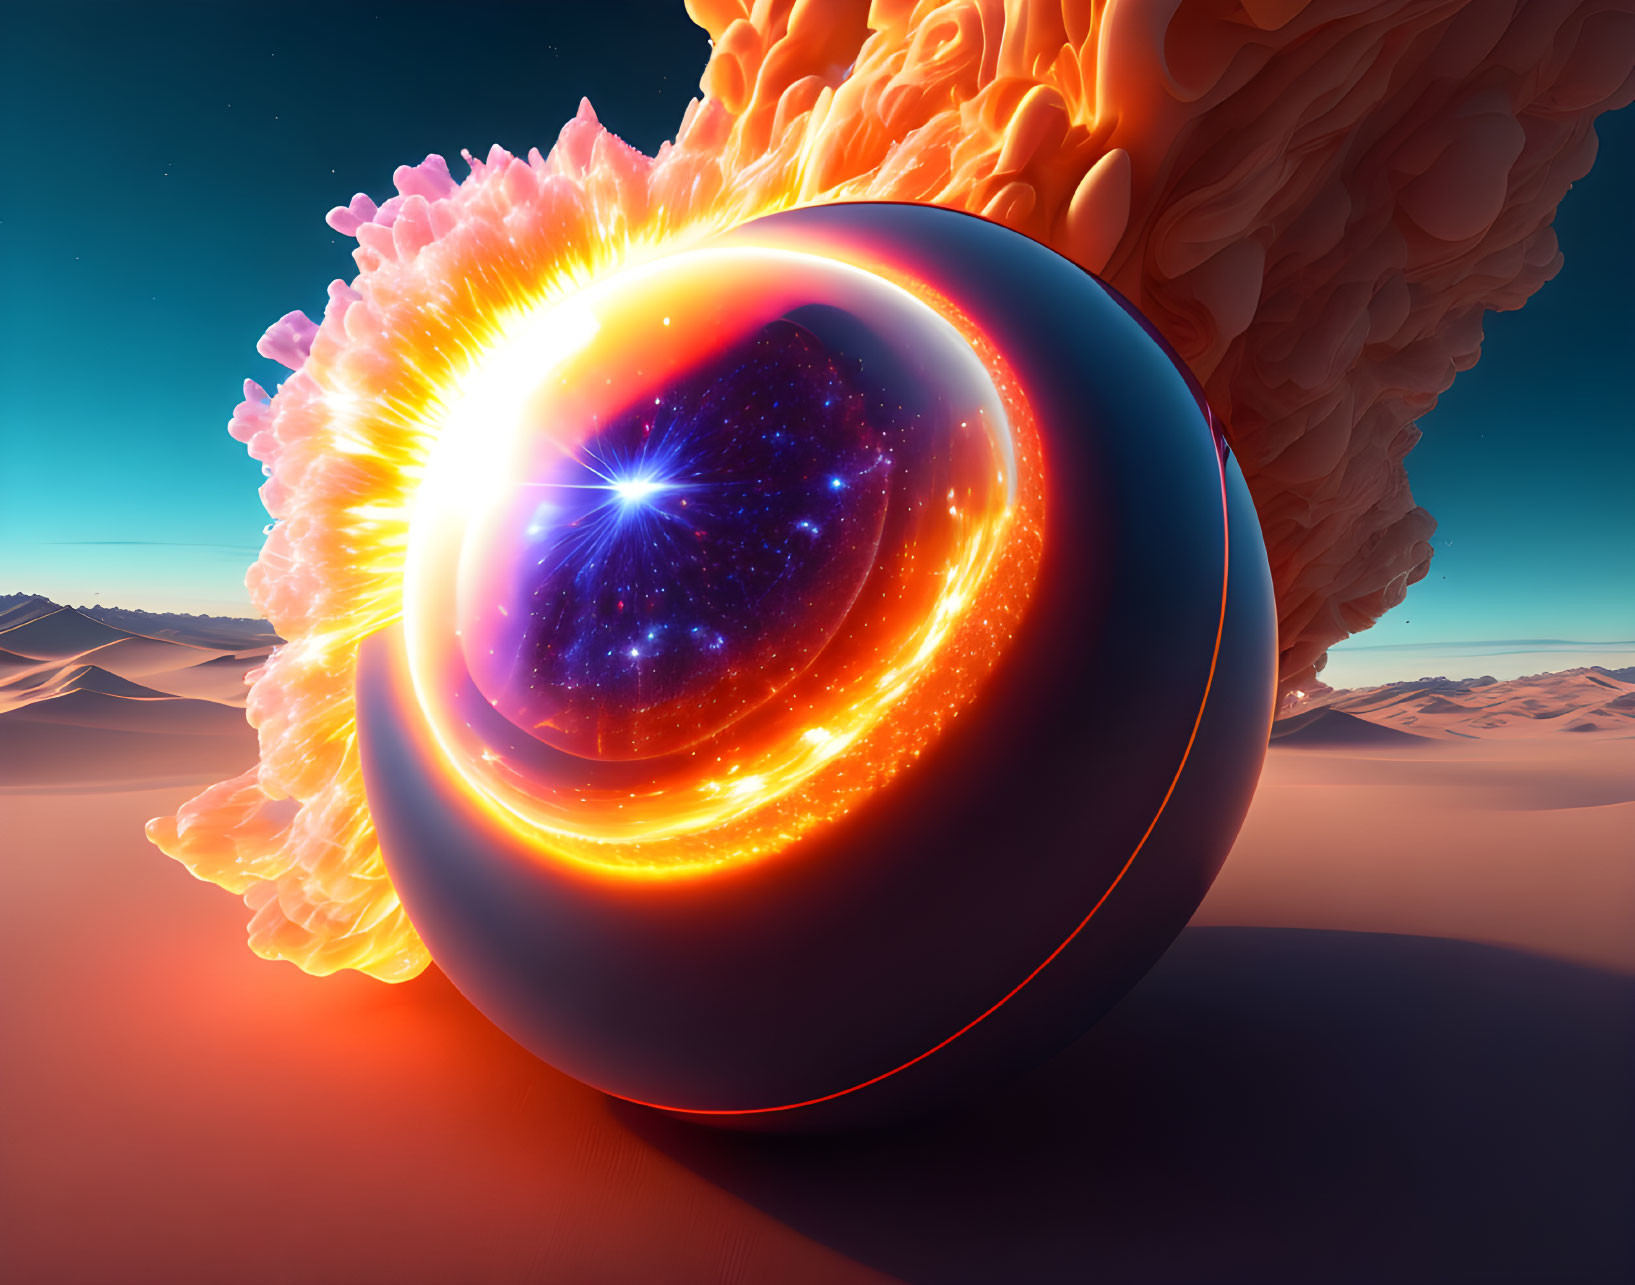 Surreal image of halved sphere with space explosion and desert background